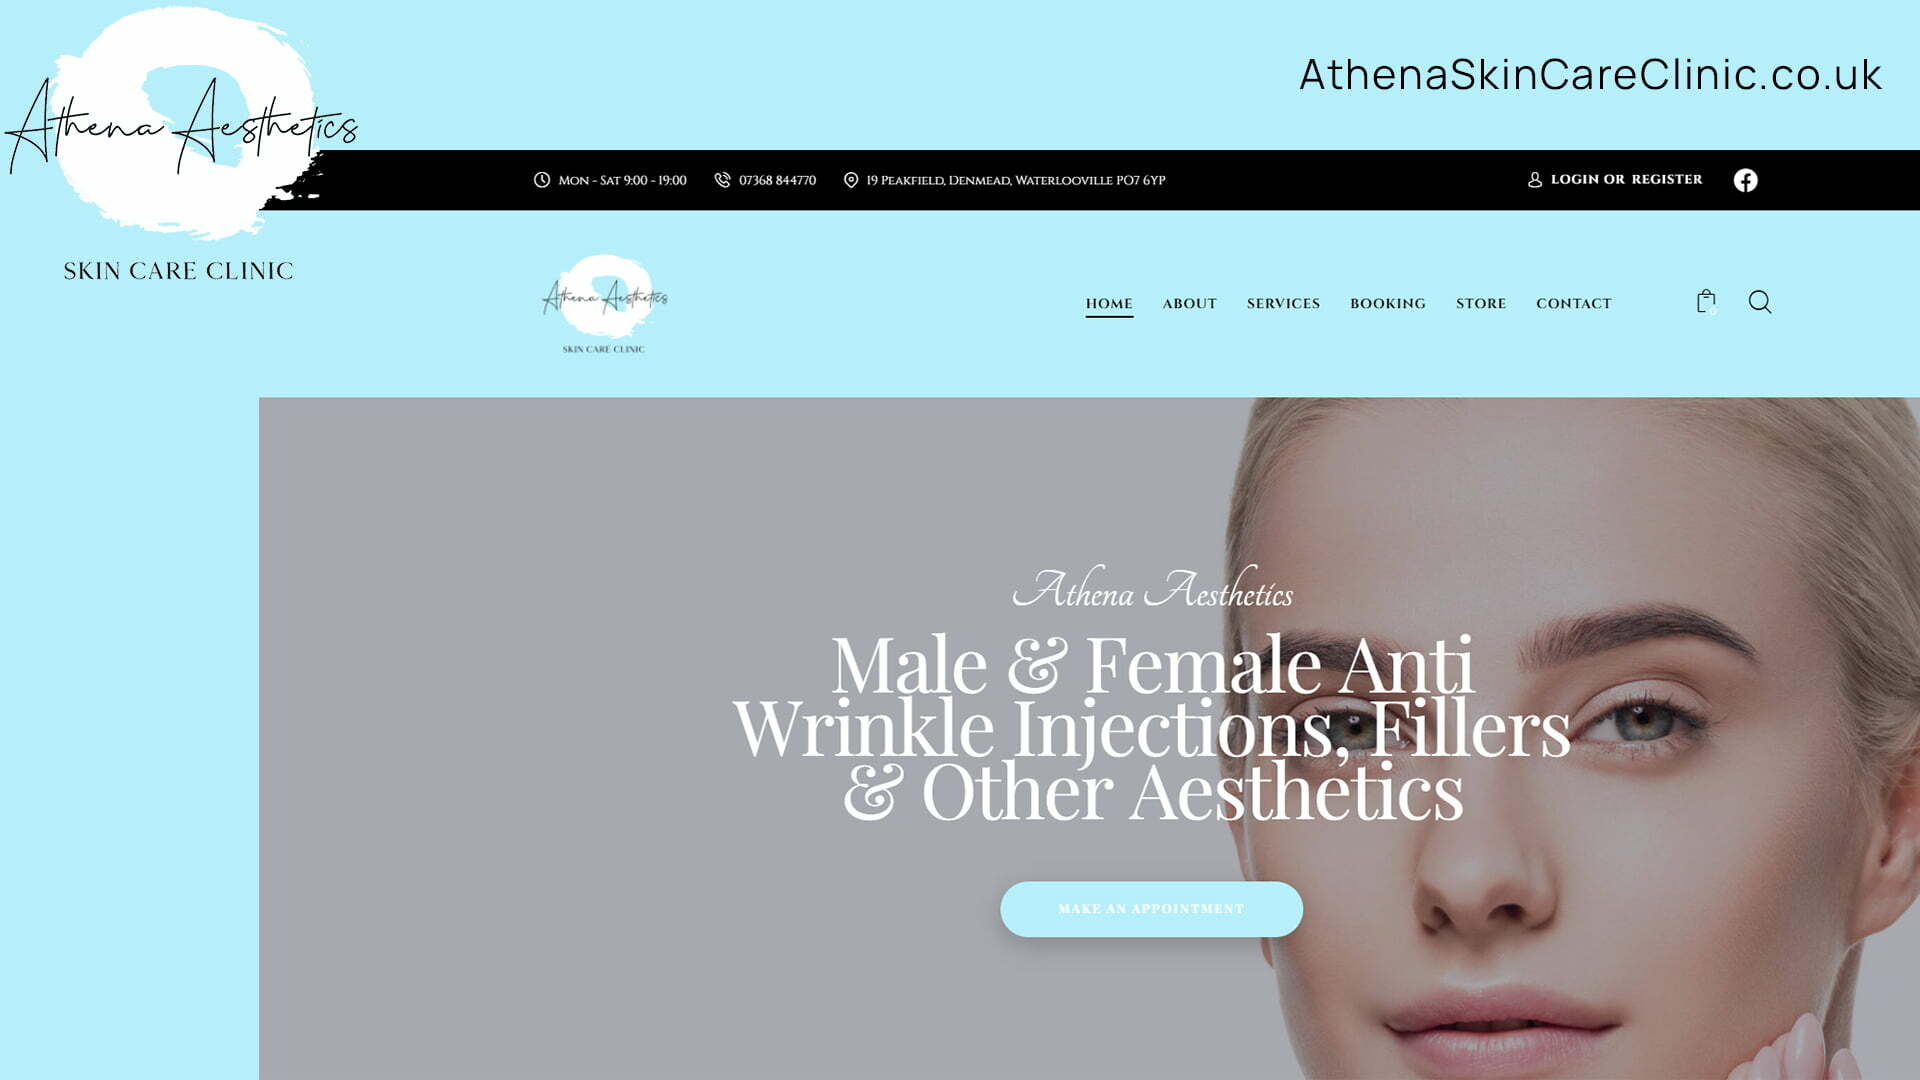 Athena Aesthetics Skin Care Clinic’s website launched!